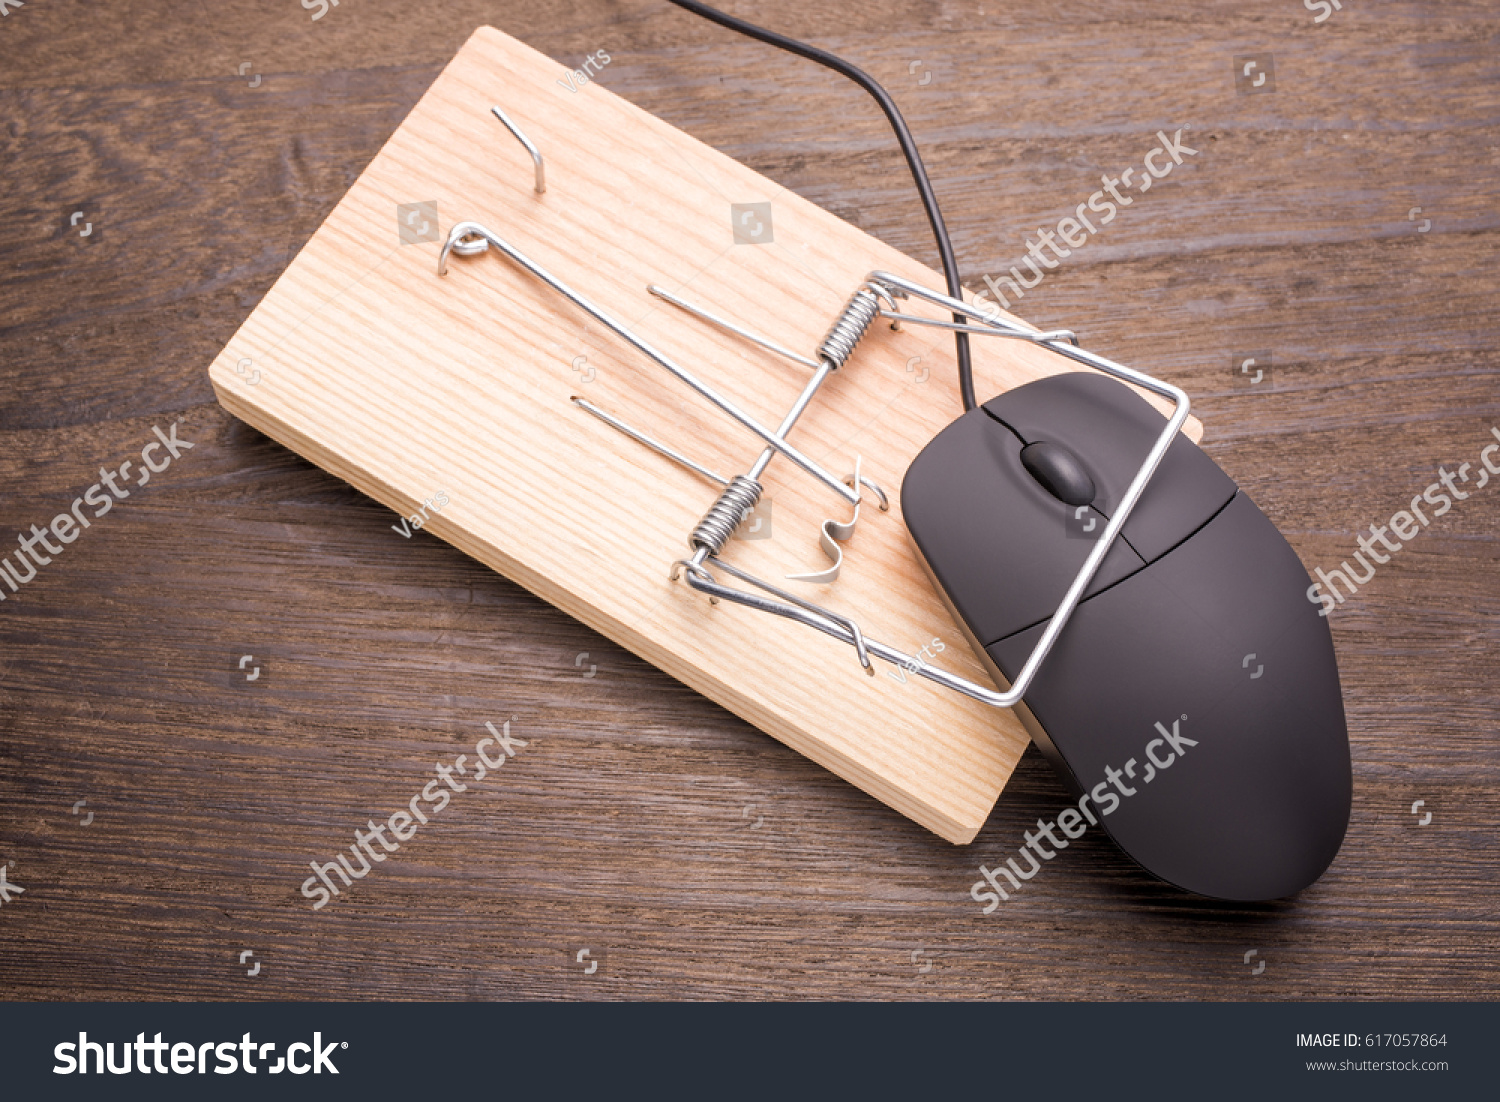 Computer mouse caught by the mousetrap device on wooden table #617057864